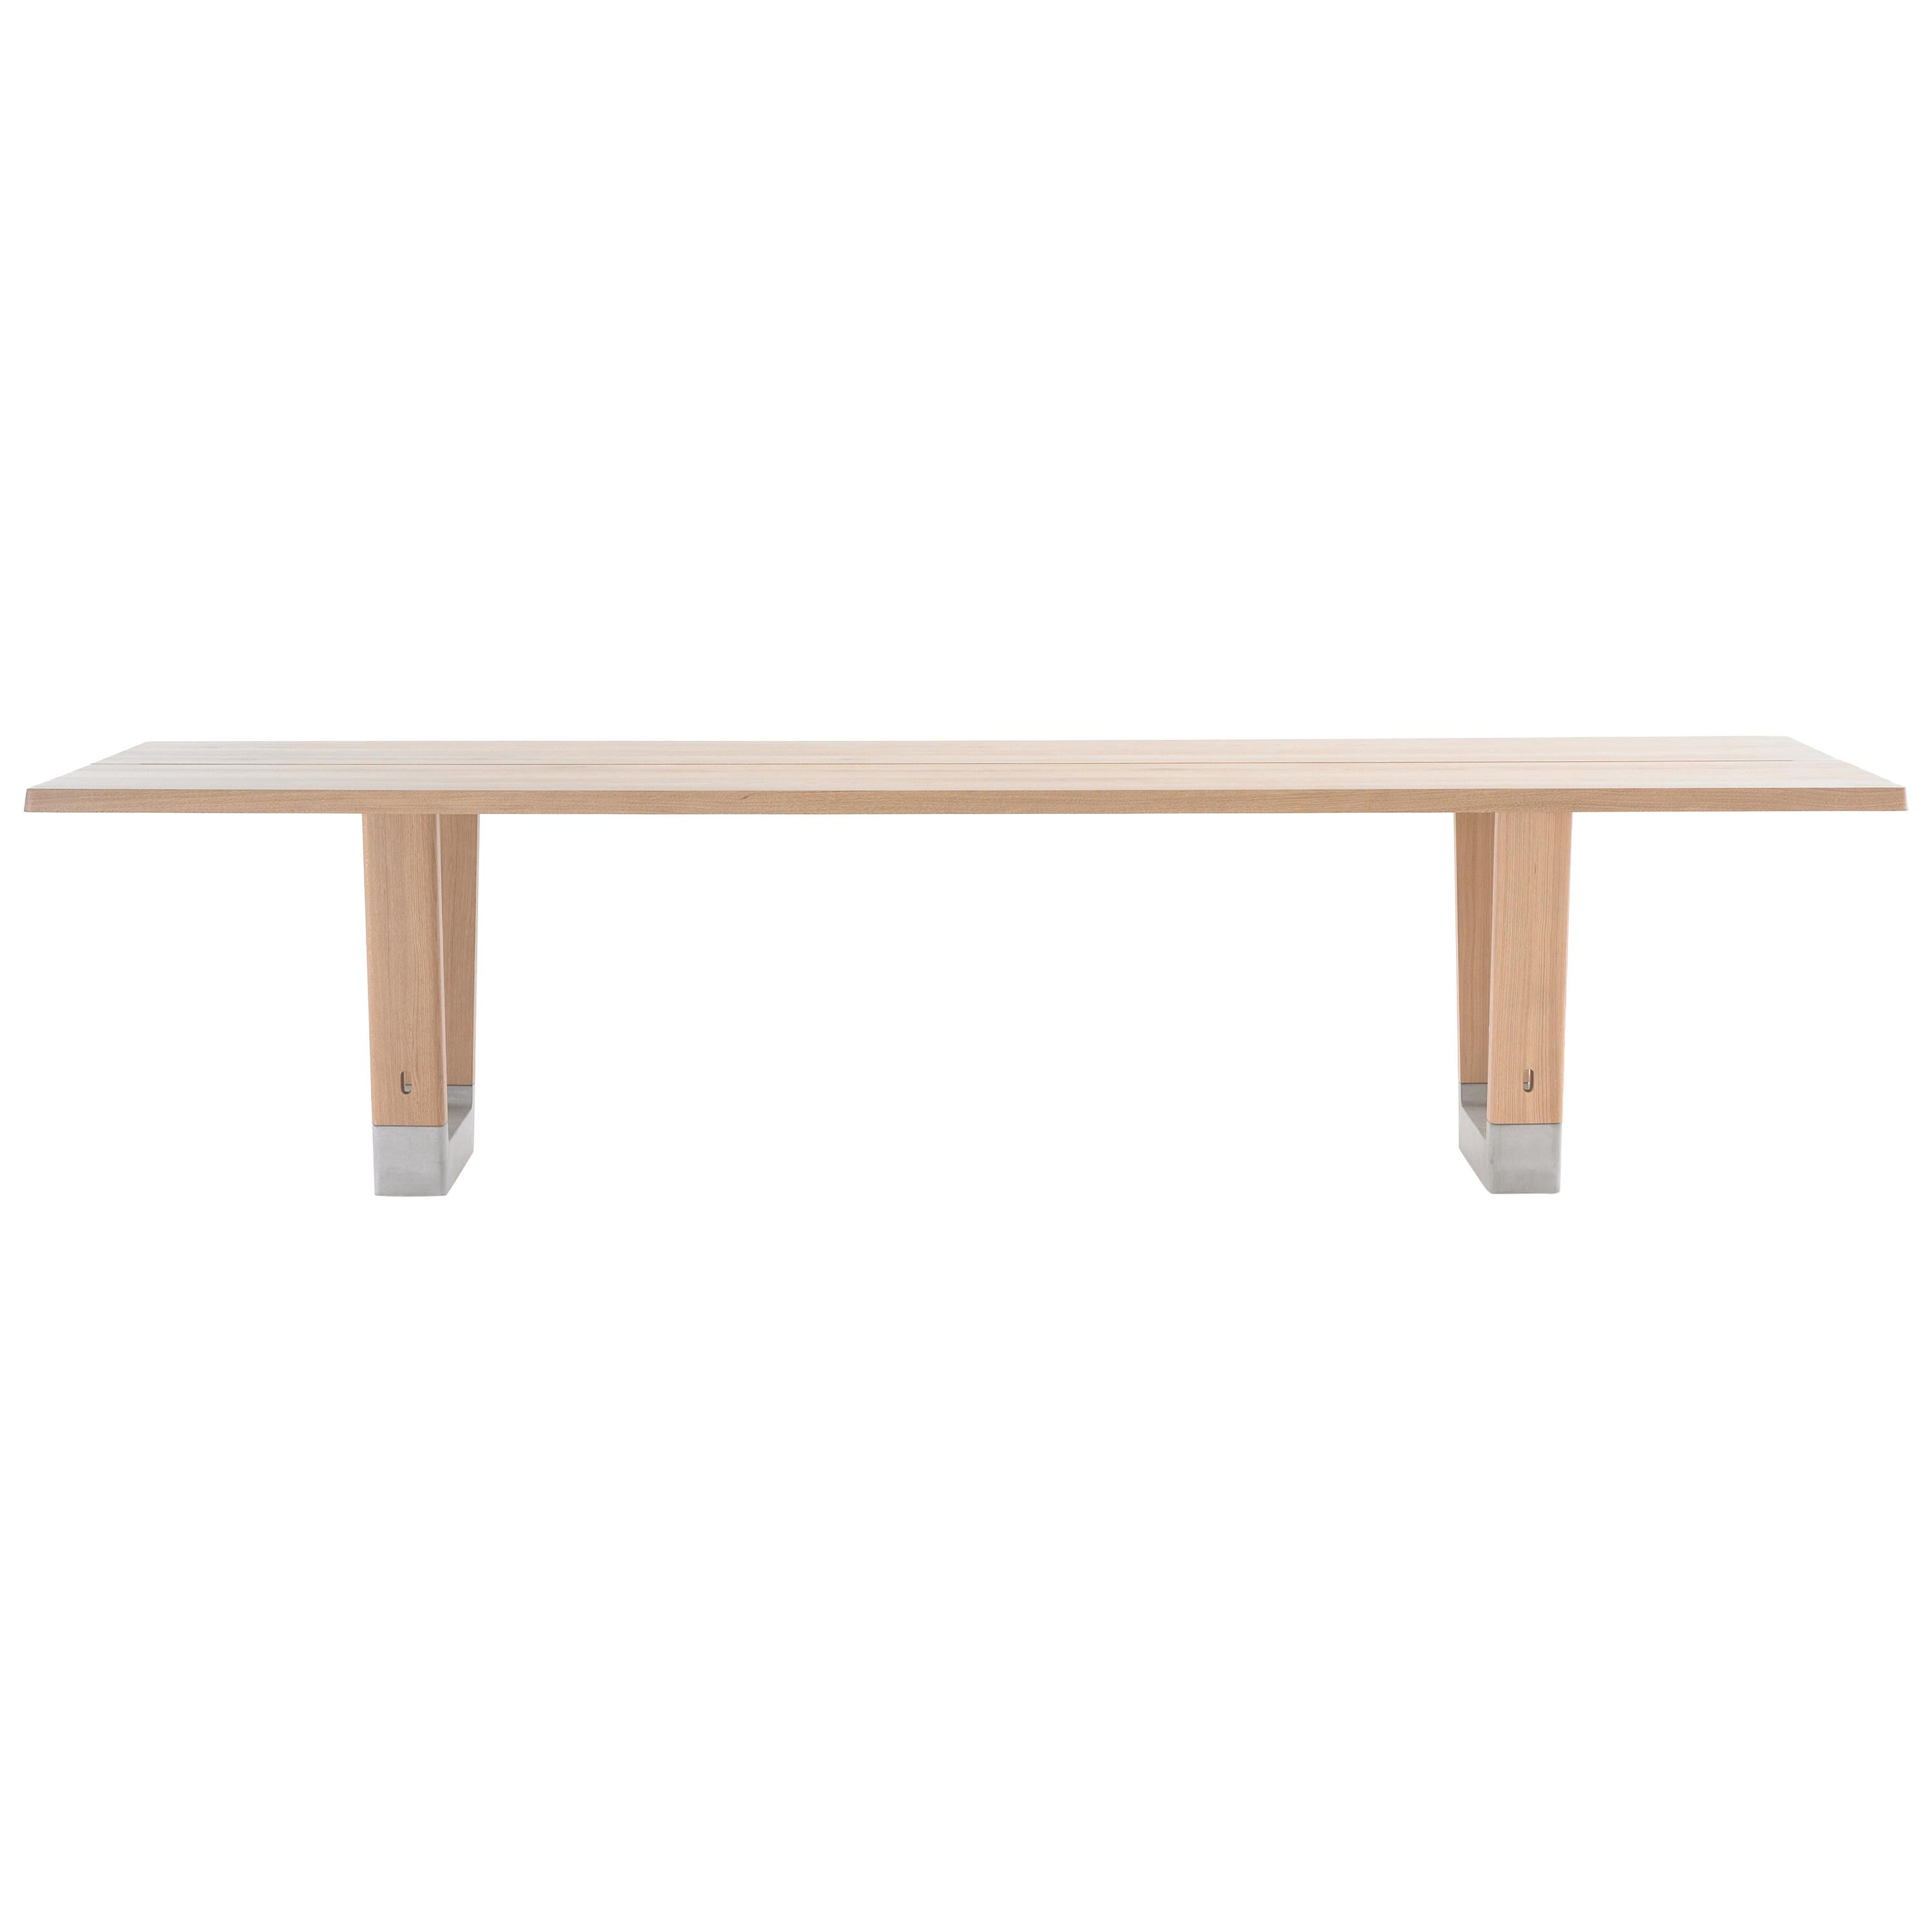 Customizable Arco Base Wood and Concrete Table by Jorre Van Ast For Sale